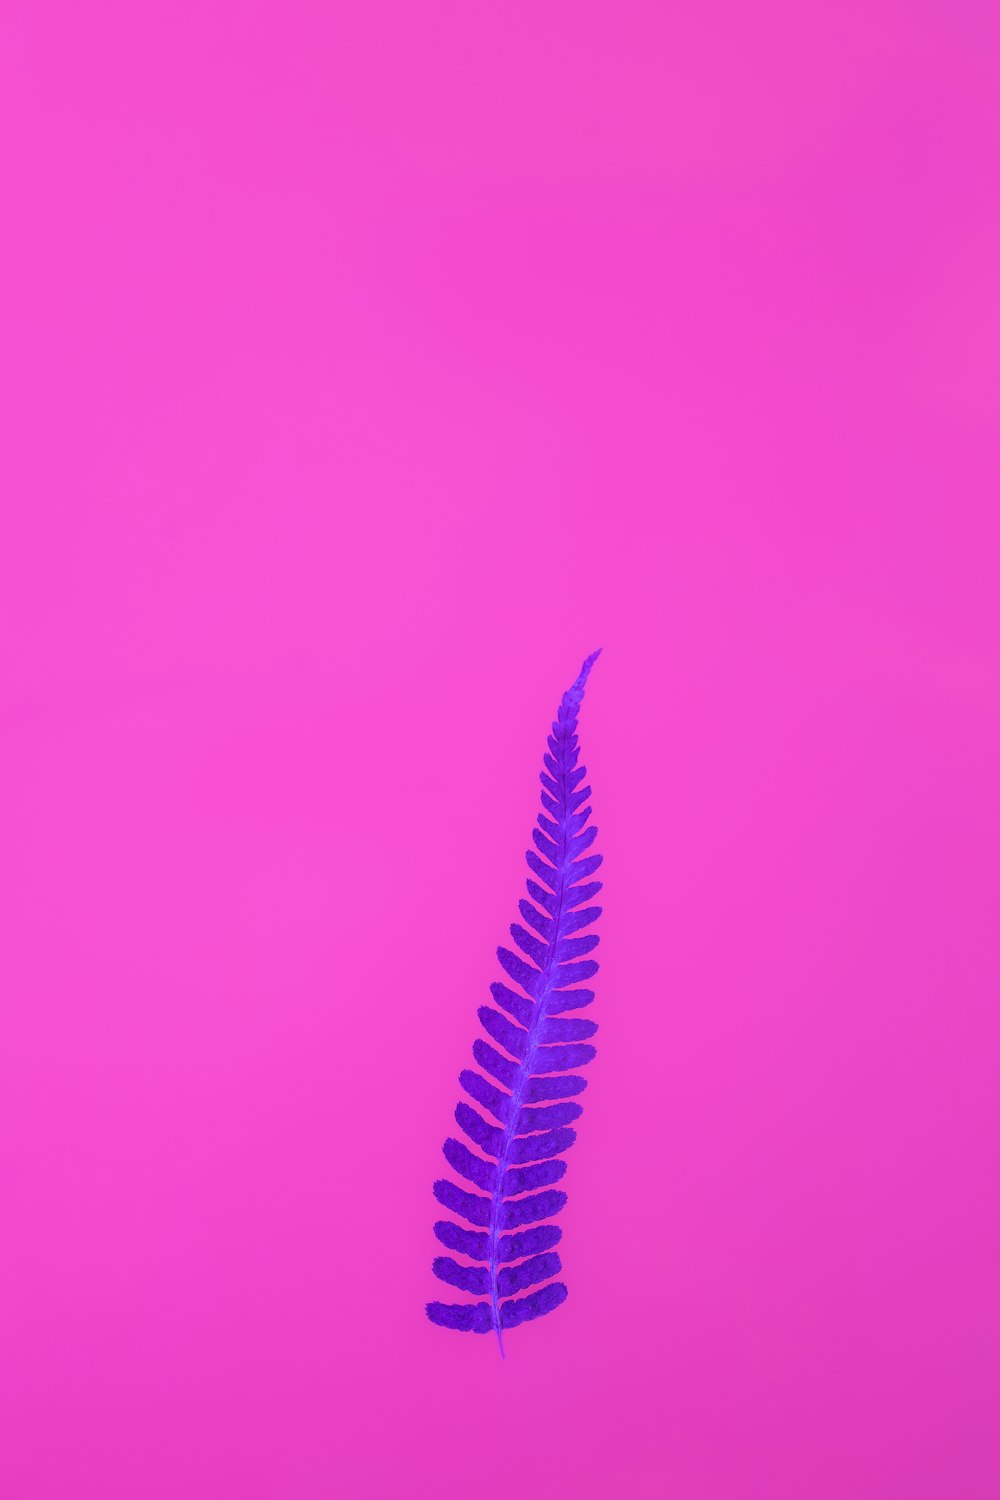 a blue feather on a pink background